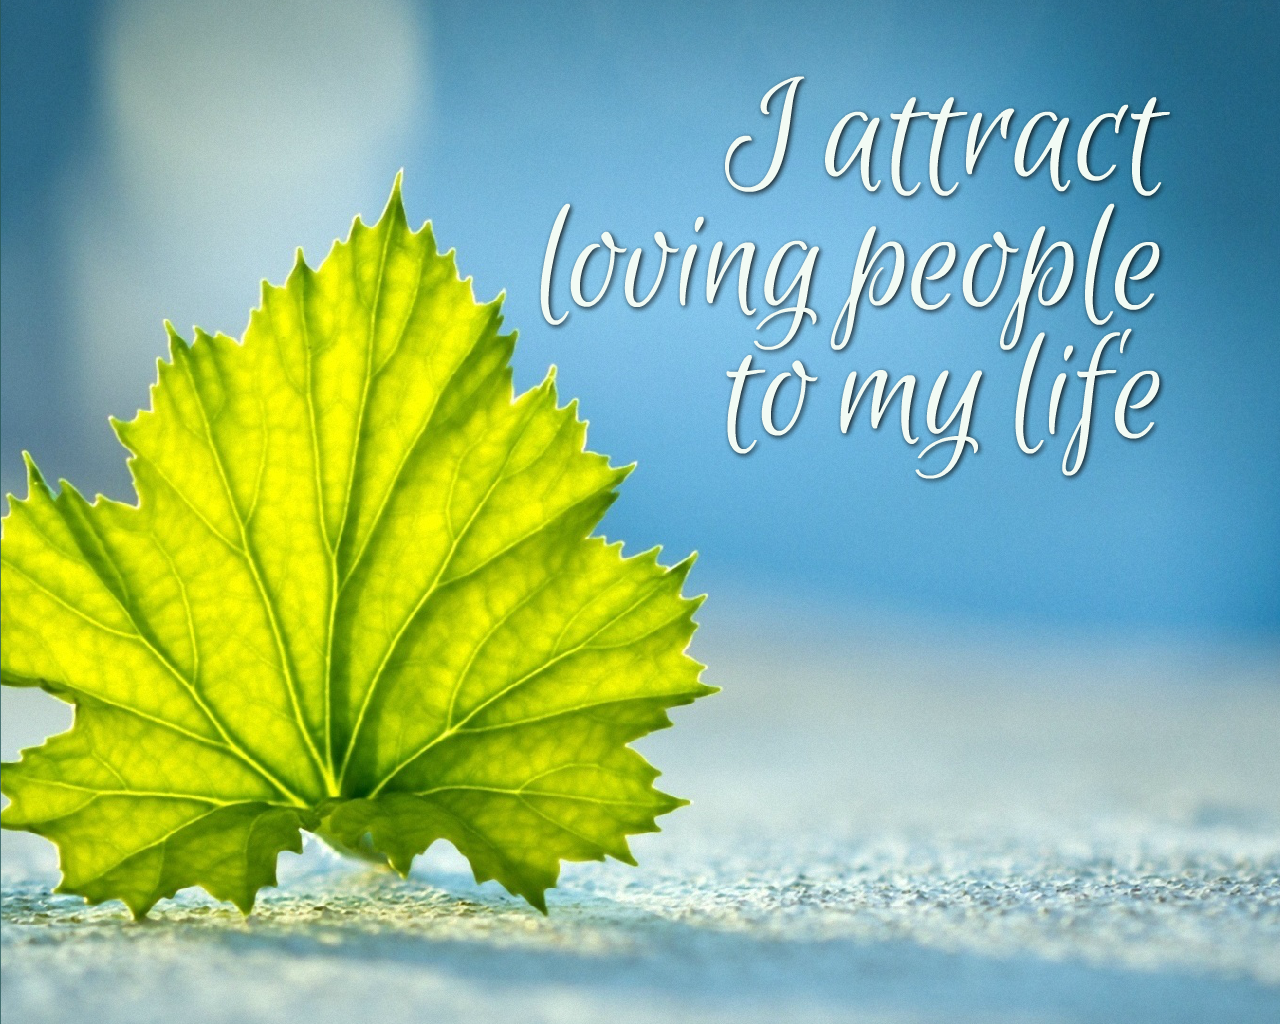 Positive Thinking Affirmation Wallpapers